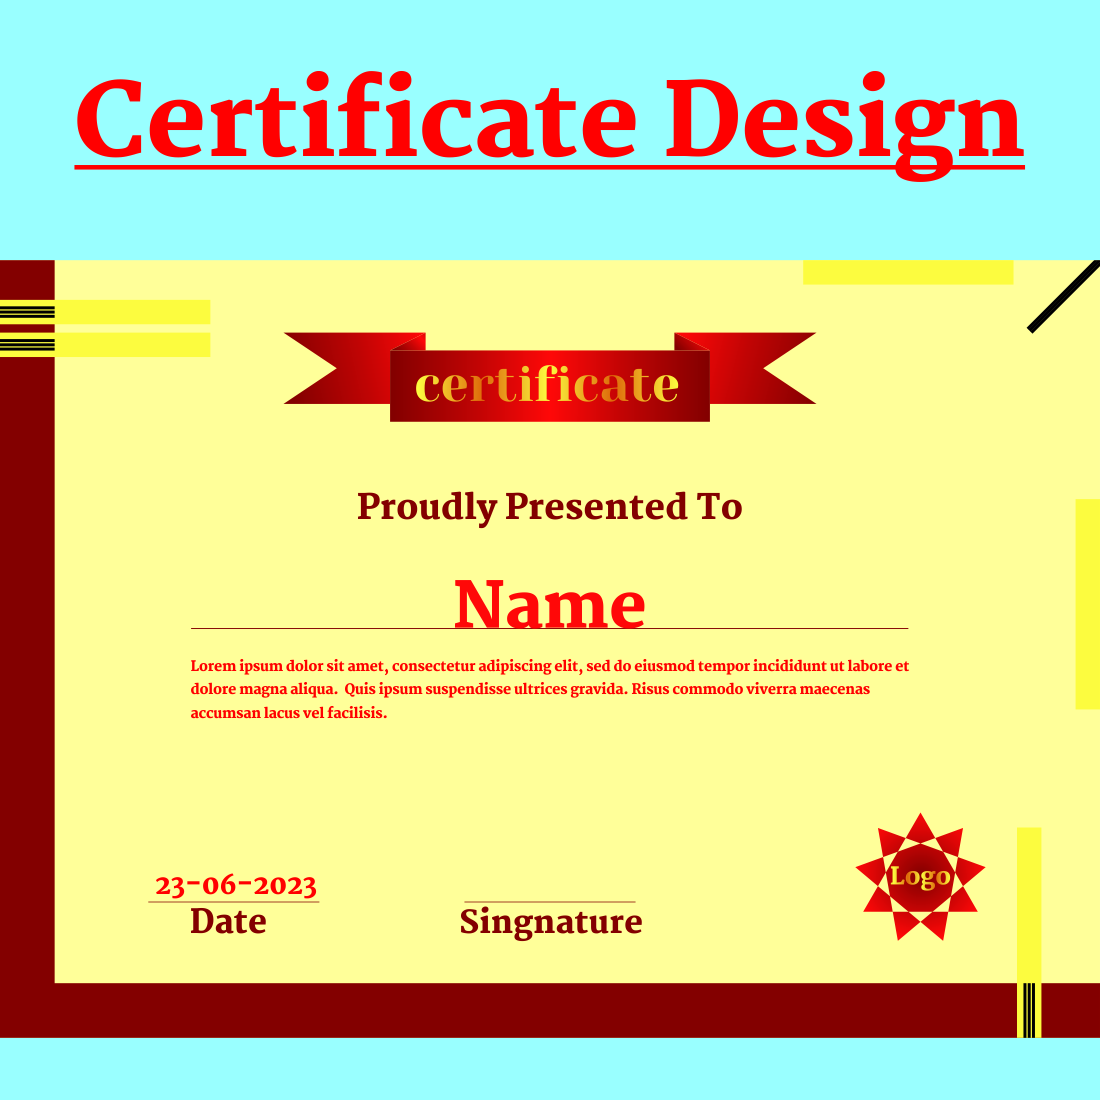 Certificate Design preview image.